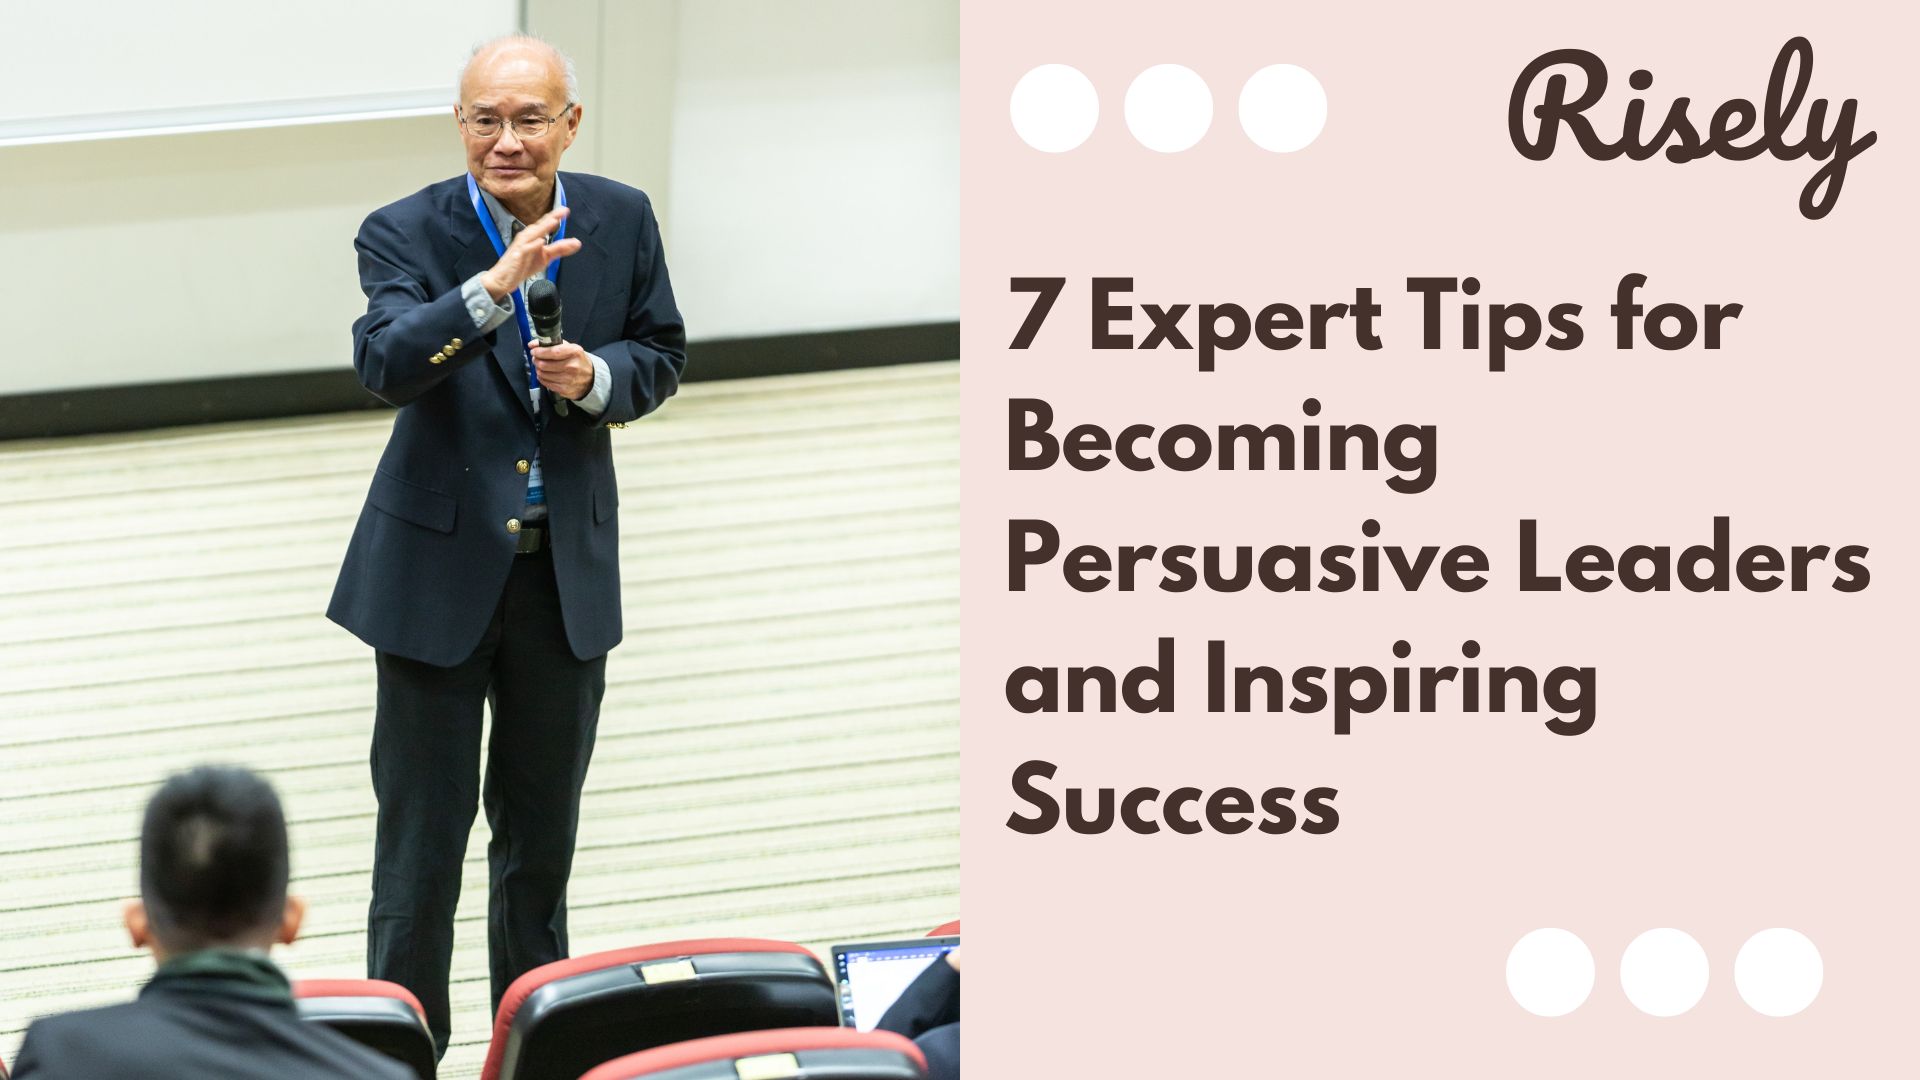 7 Expert Tips for Becoming Persuasive Leaders and Inspiring Success